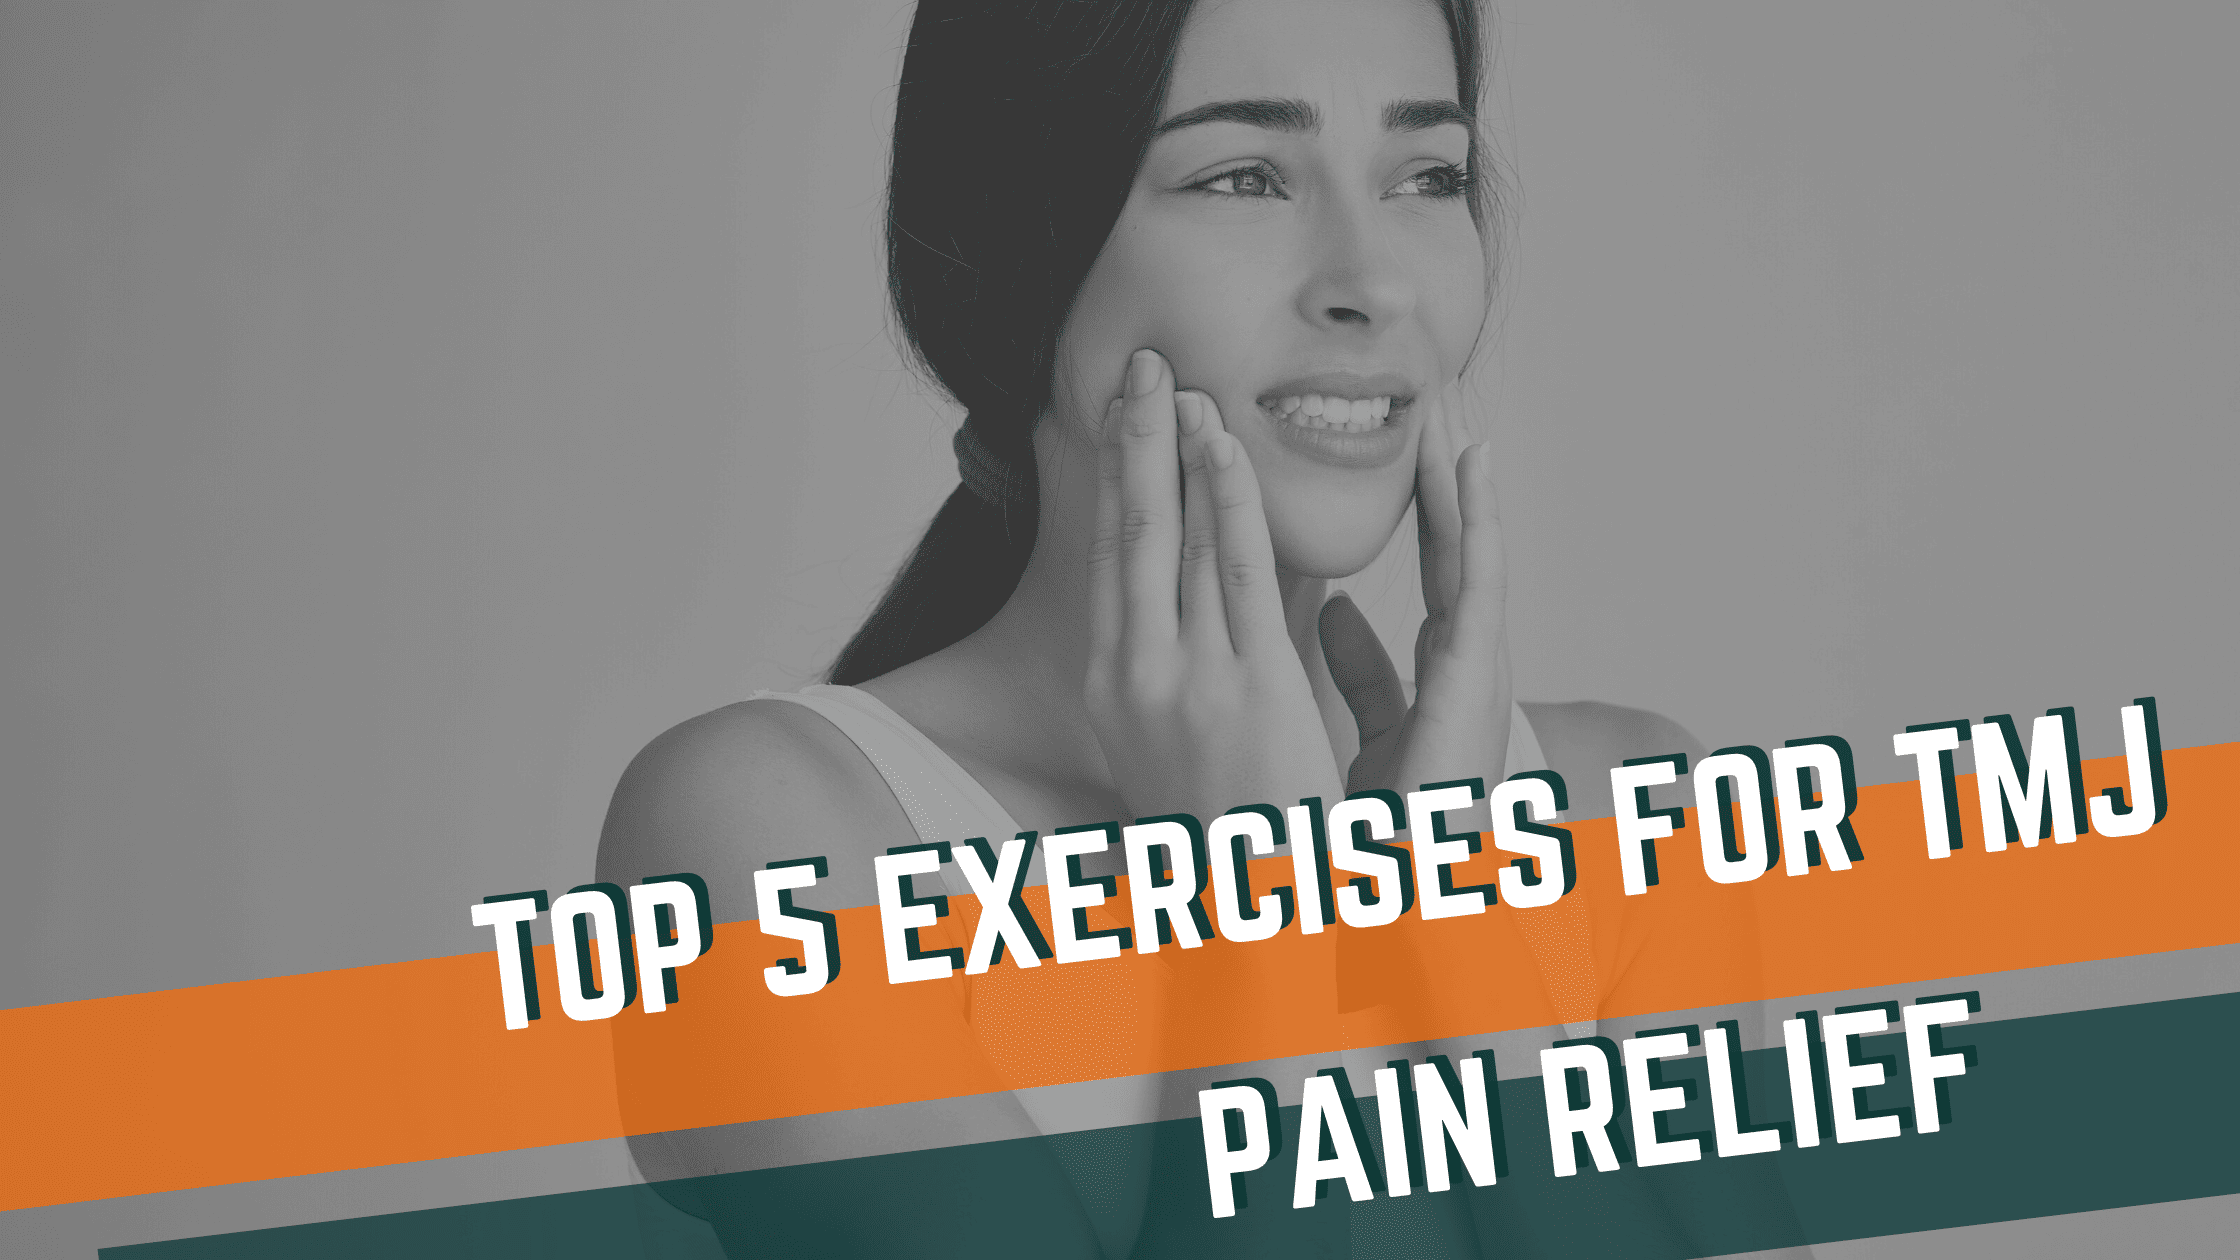 Top 5 Exercises for TMJ Pain Relief